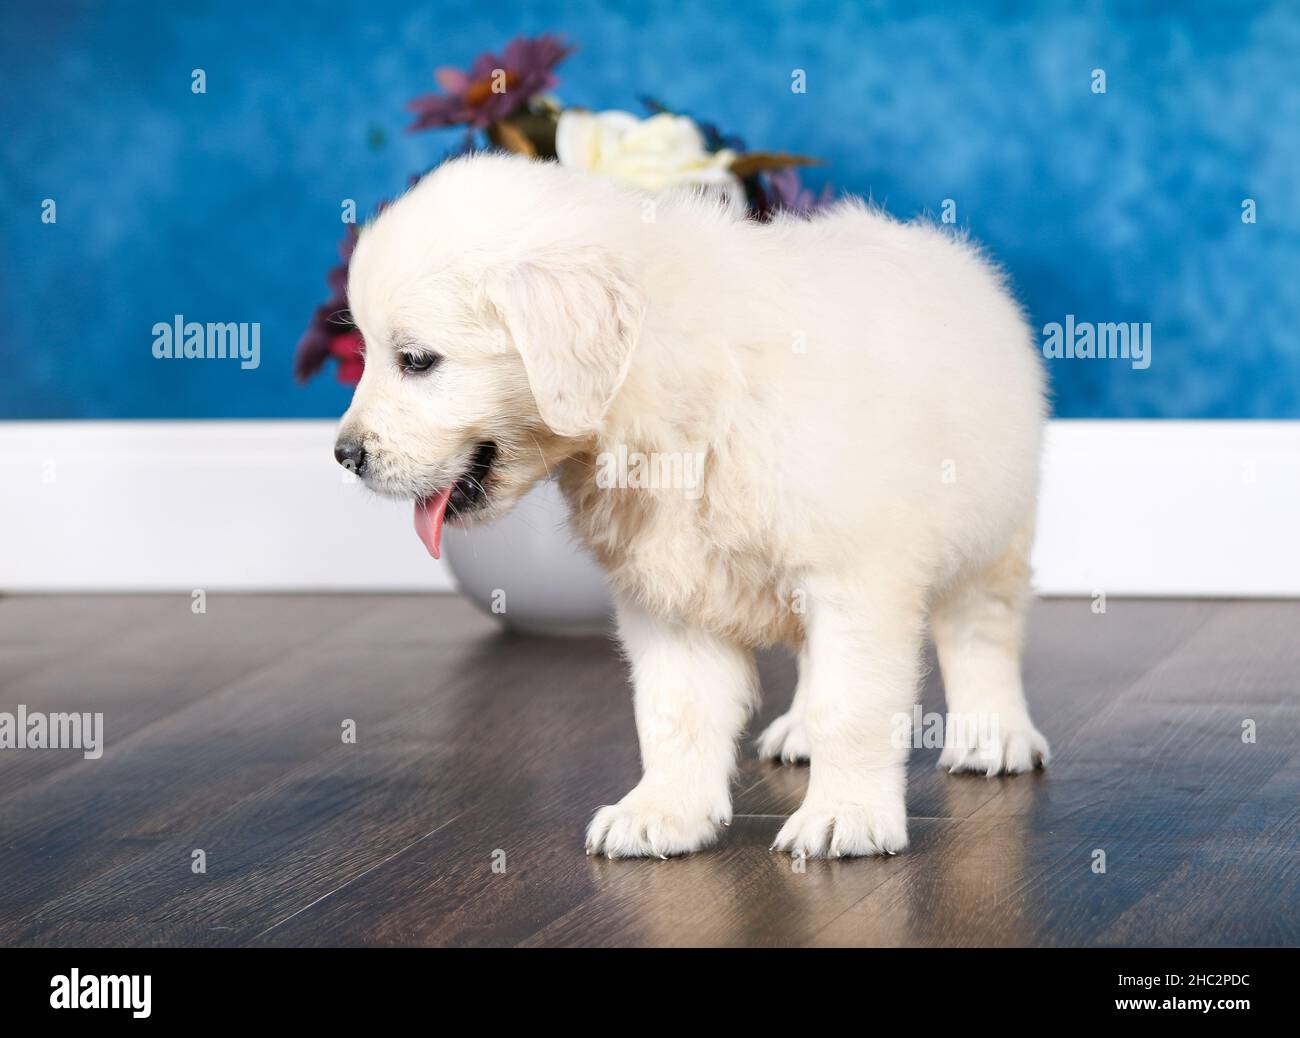 English Cream Golden Retriever puppy sticking out tongue in room with blue wall Stock Photo